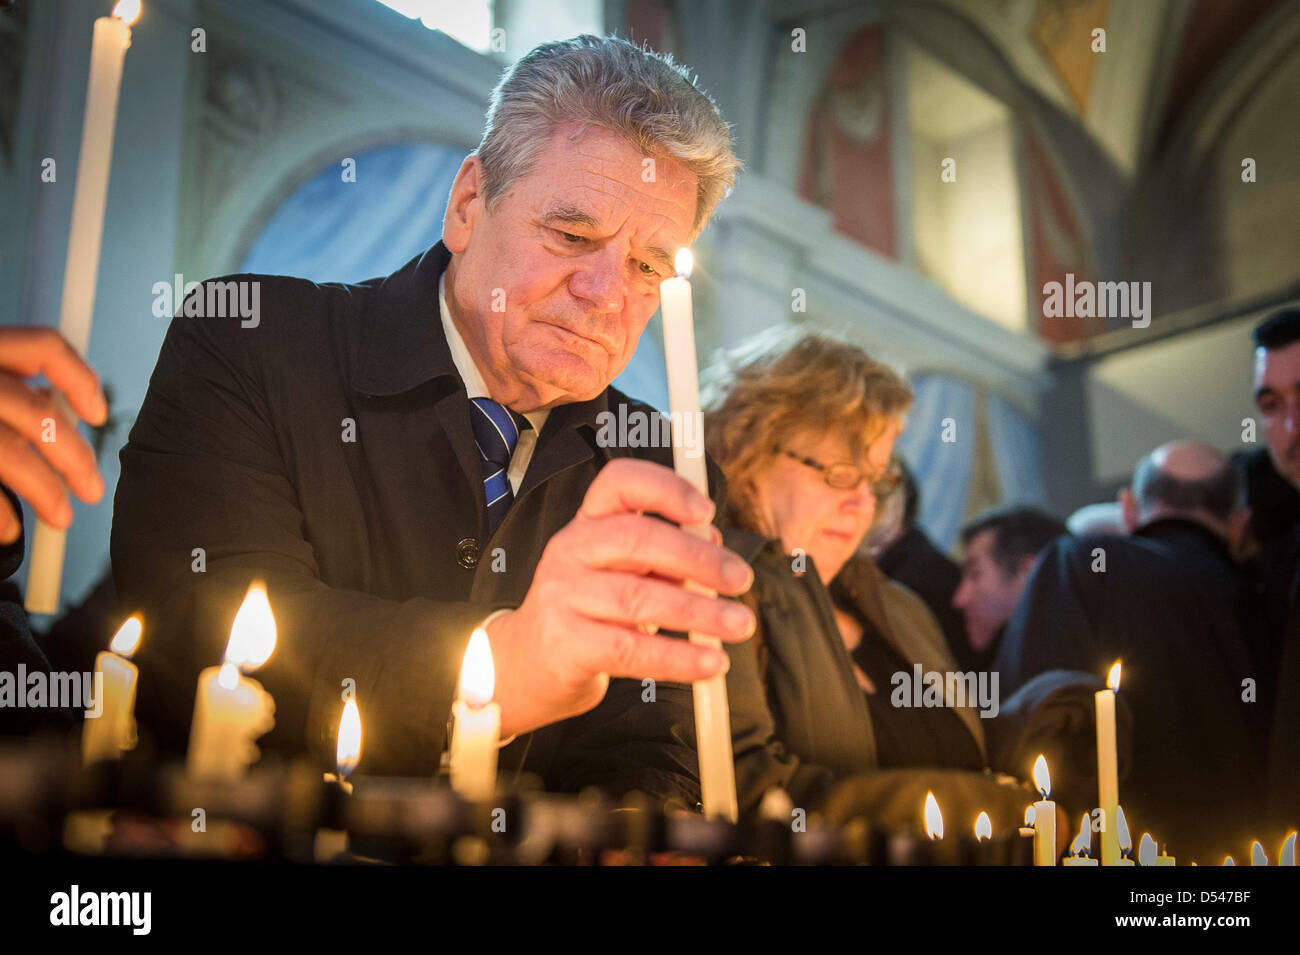 German President Joachim Gauck lights a candle in the chapel of the Tuscan village Sant'Anna di Stazzema, Italy, 24 March 2013. In 1944, Sant'Anna di Stazzema was the site of a Nazi atrocity during World War II. In the course of an operation against the Italian resistance movement about 560 local villagers and refugees were murdered and their bodies burnt in a scorched earth policy action by the German occupation forces of the Waffen-SS. Photo: JESCO DENZEL Stock Photo